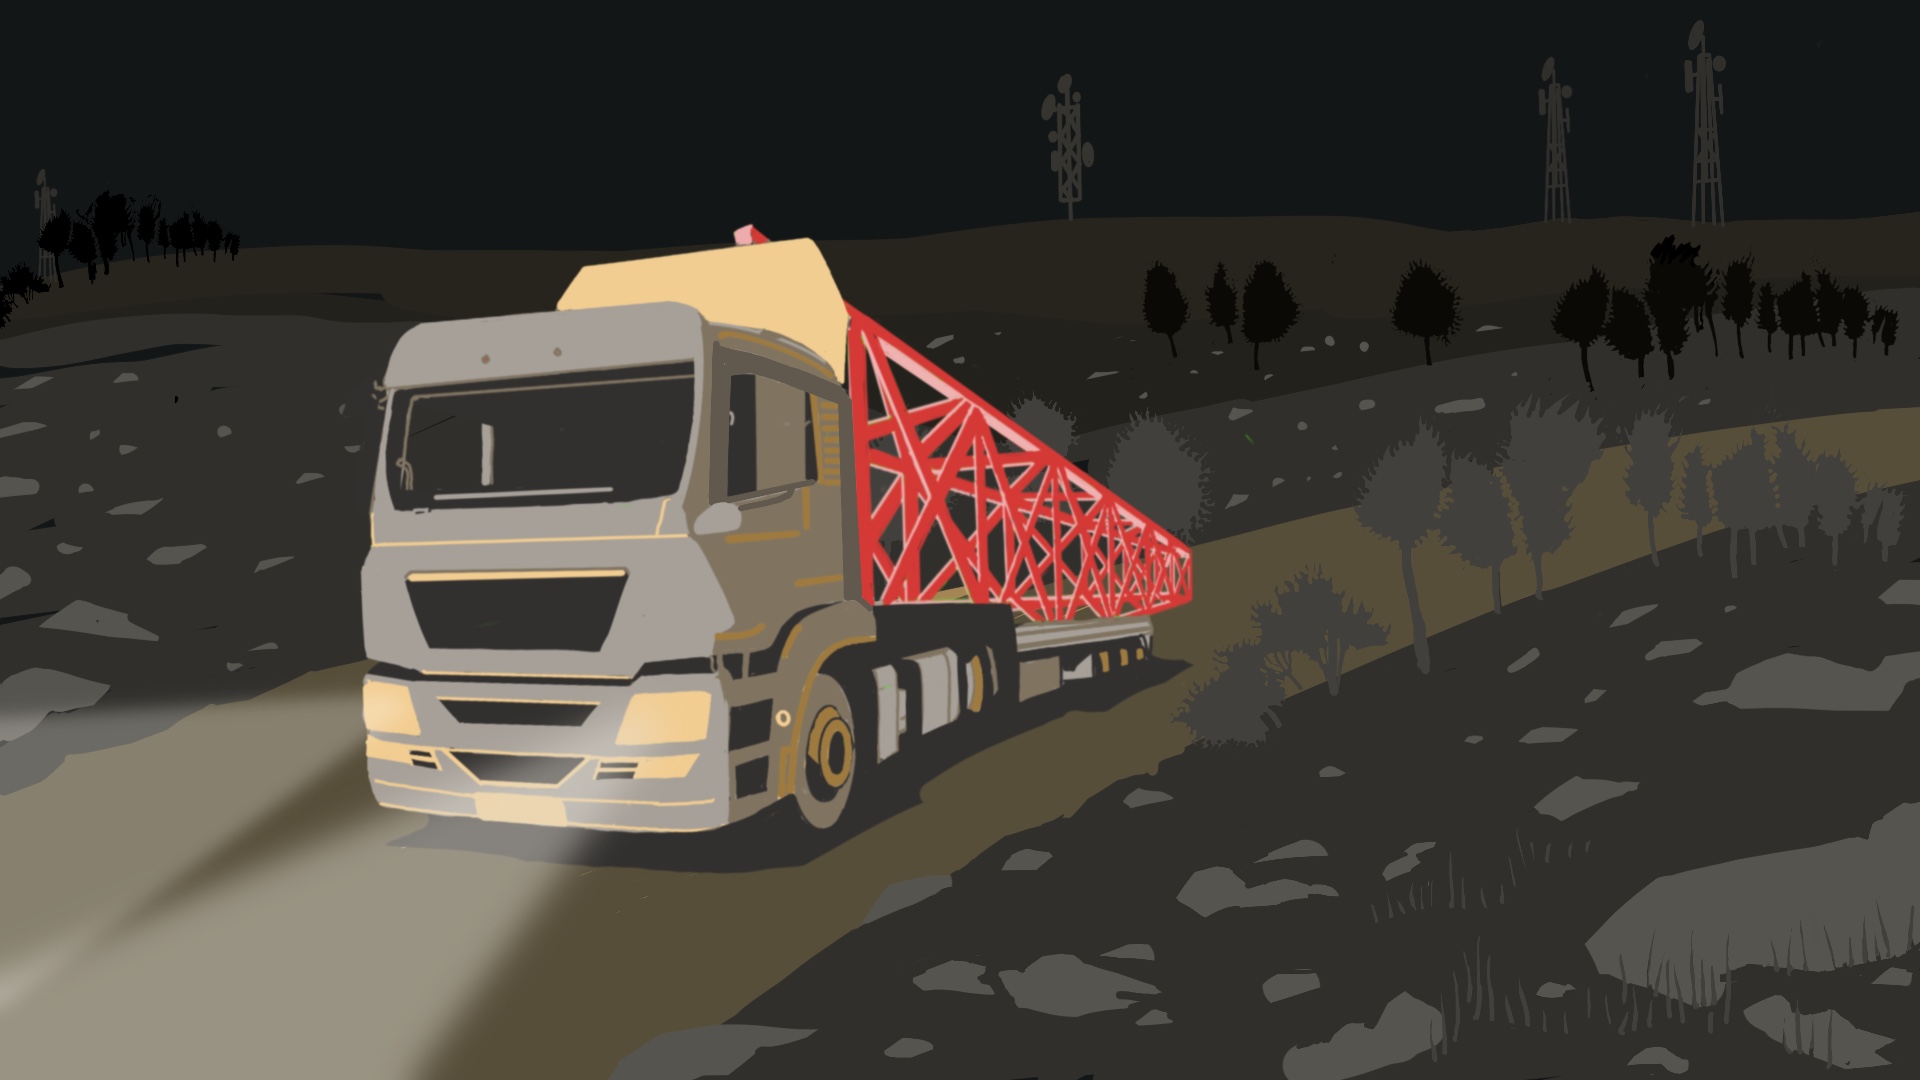 Illustration of a truck with a phone tower